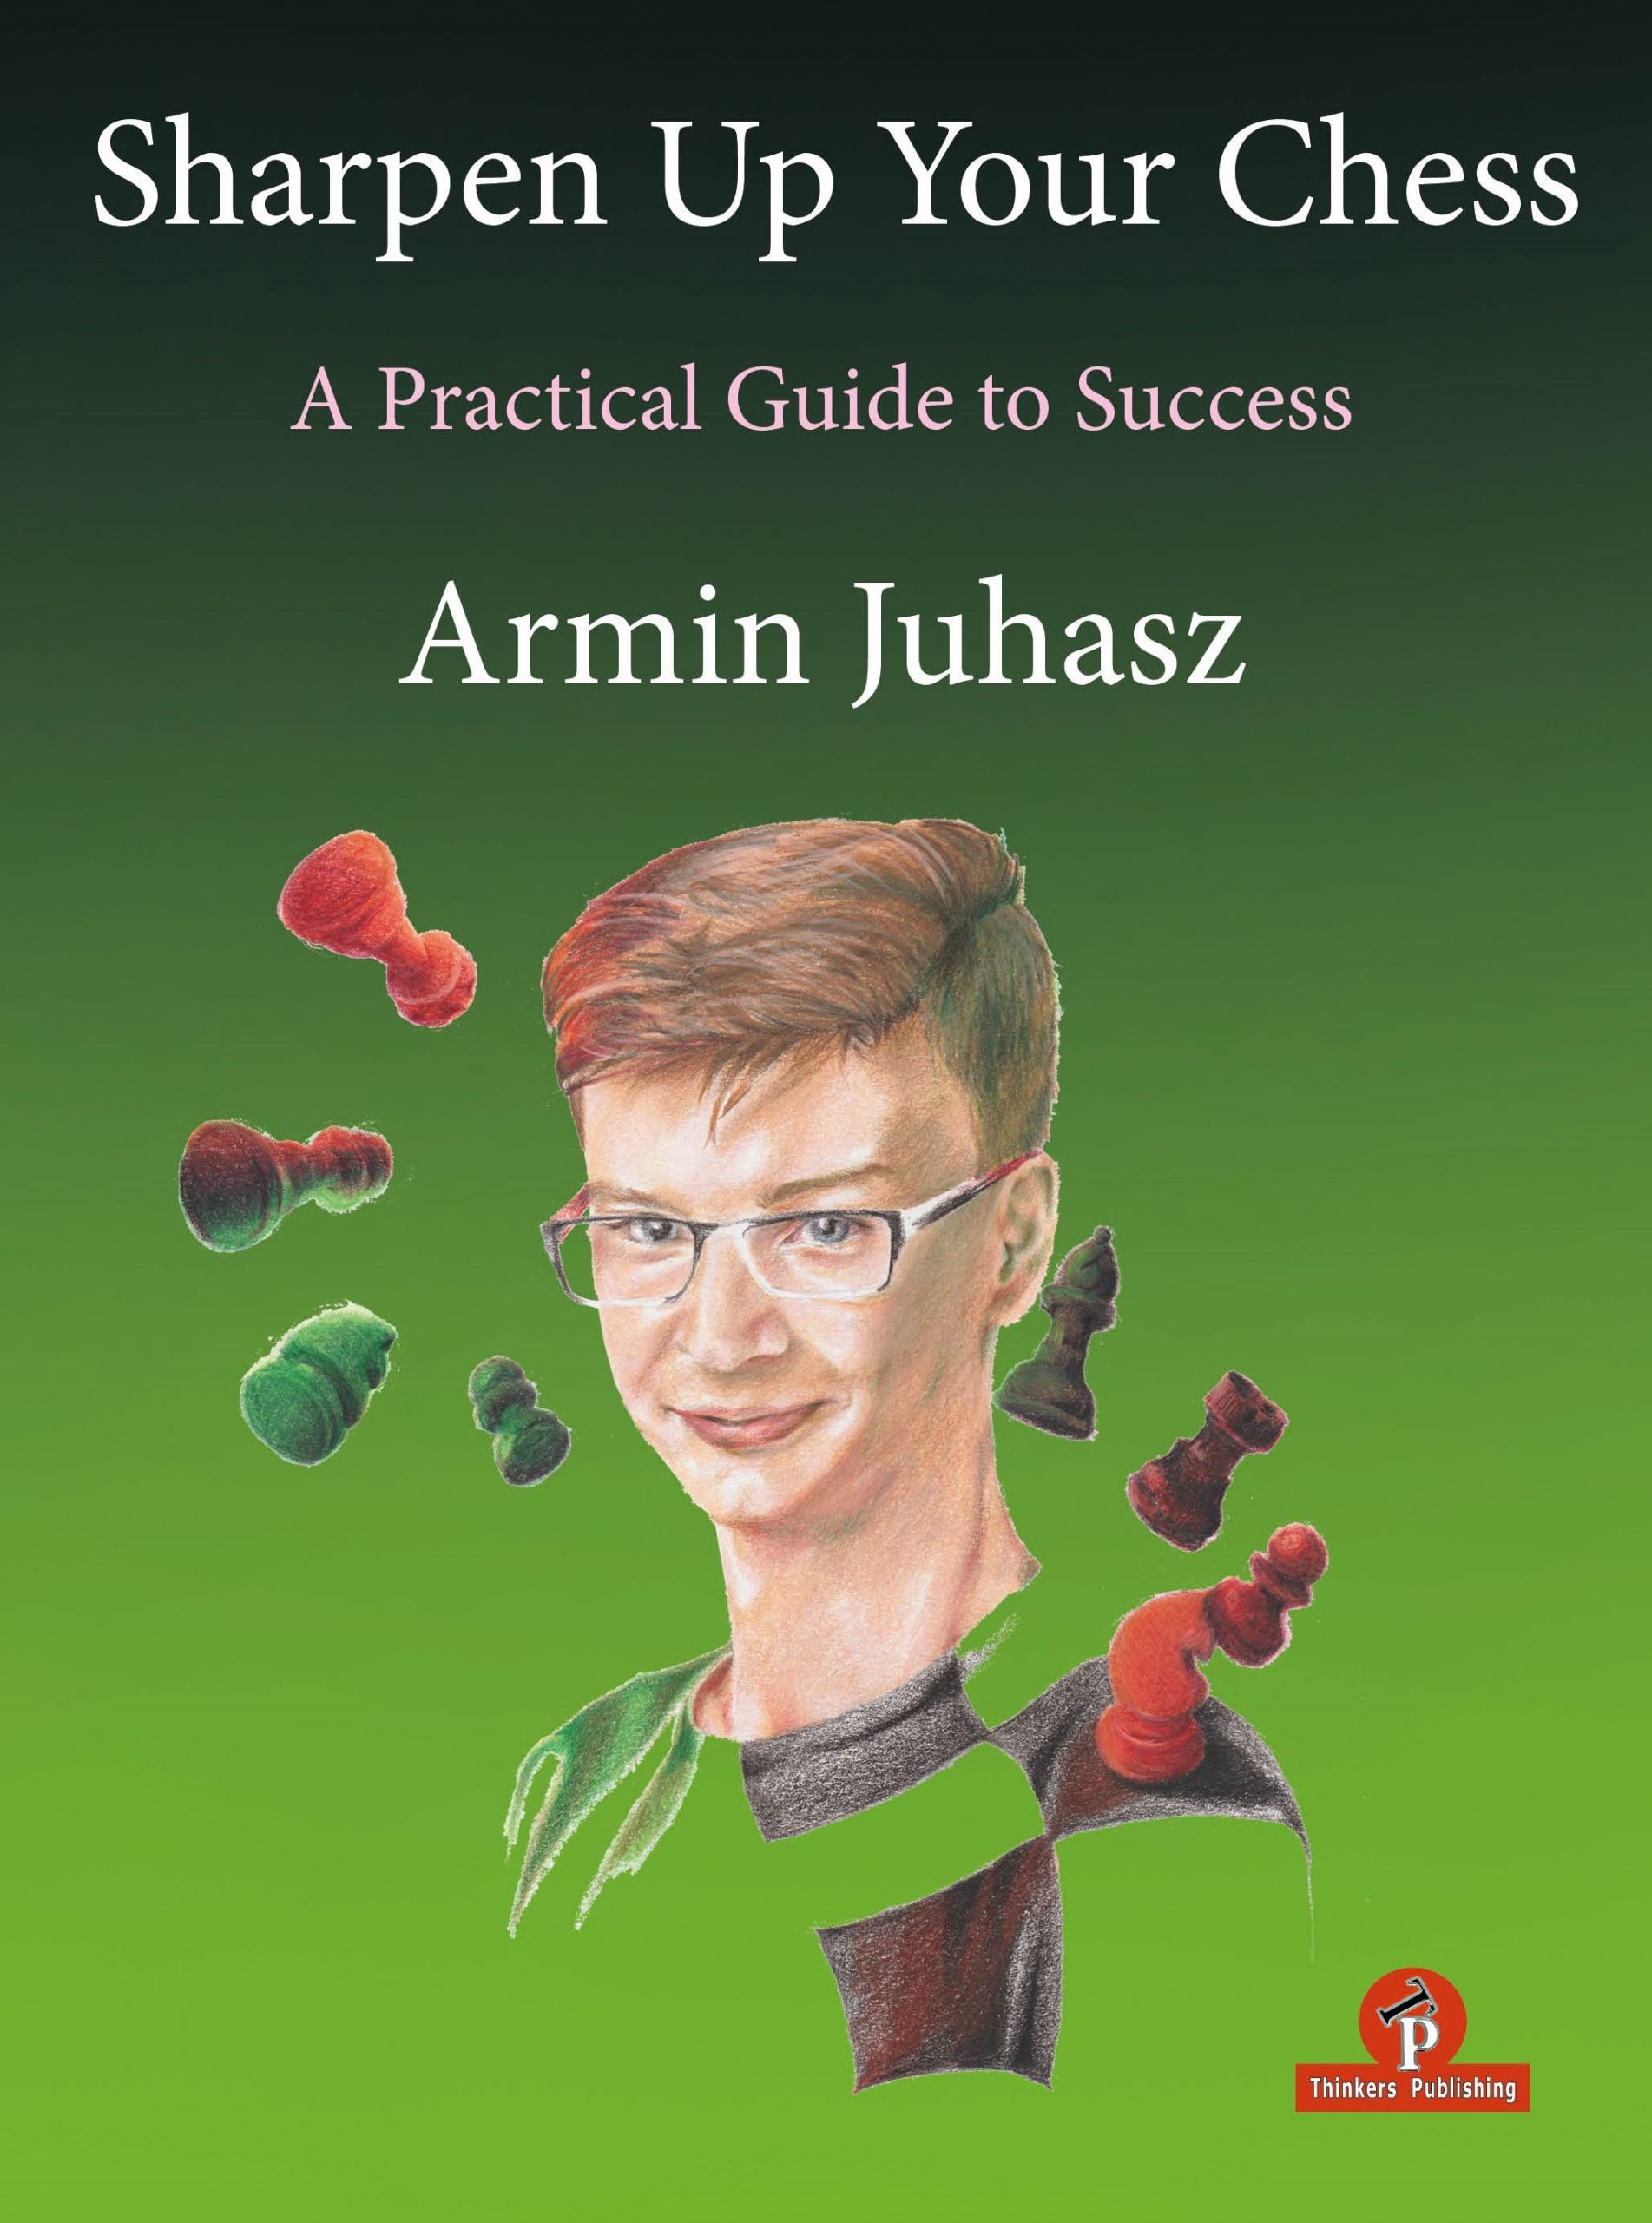 Sharpen Up Your Chess! – A Practical Guide to Success